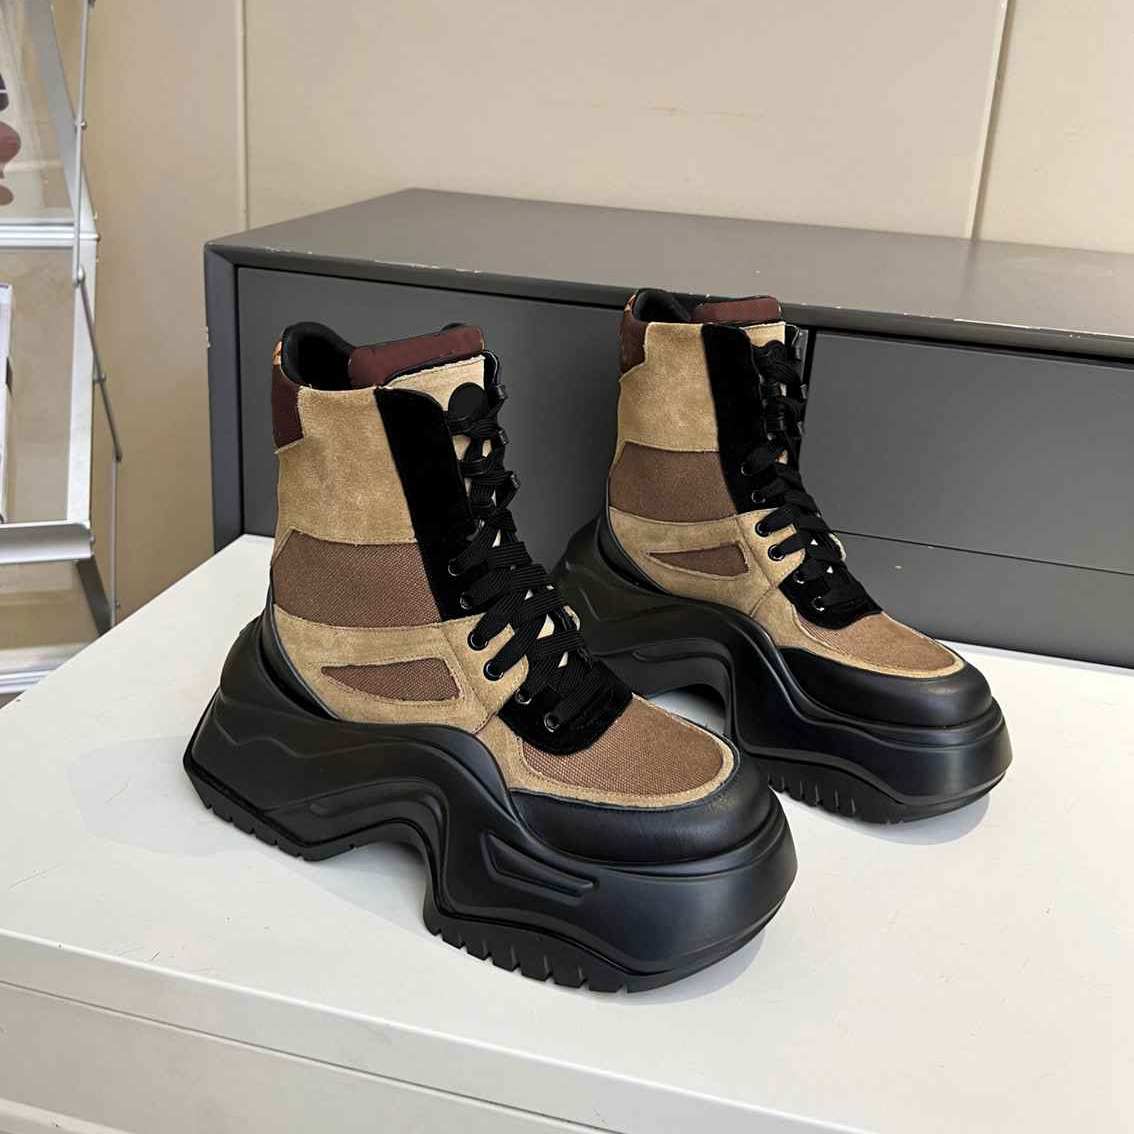 2024 New Boots 10A High Quality Desginer Women boots Stylish brown Martin boots high heelscut dance shoes Archlight 2 0 Platform Ankle Boot Oversized rubber